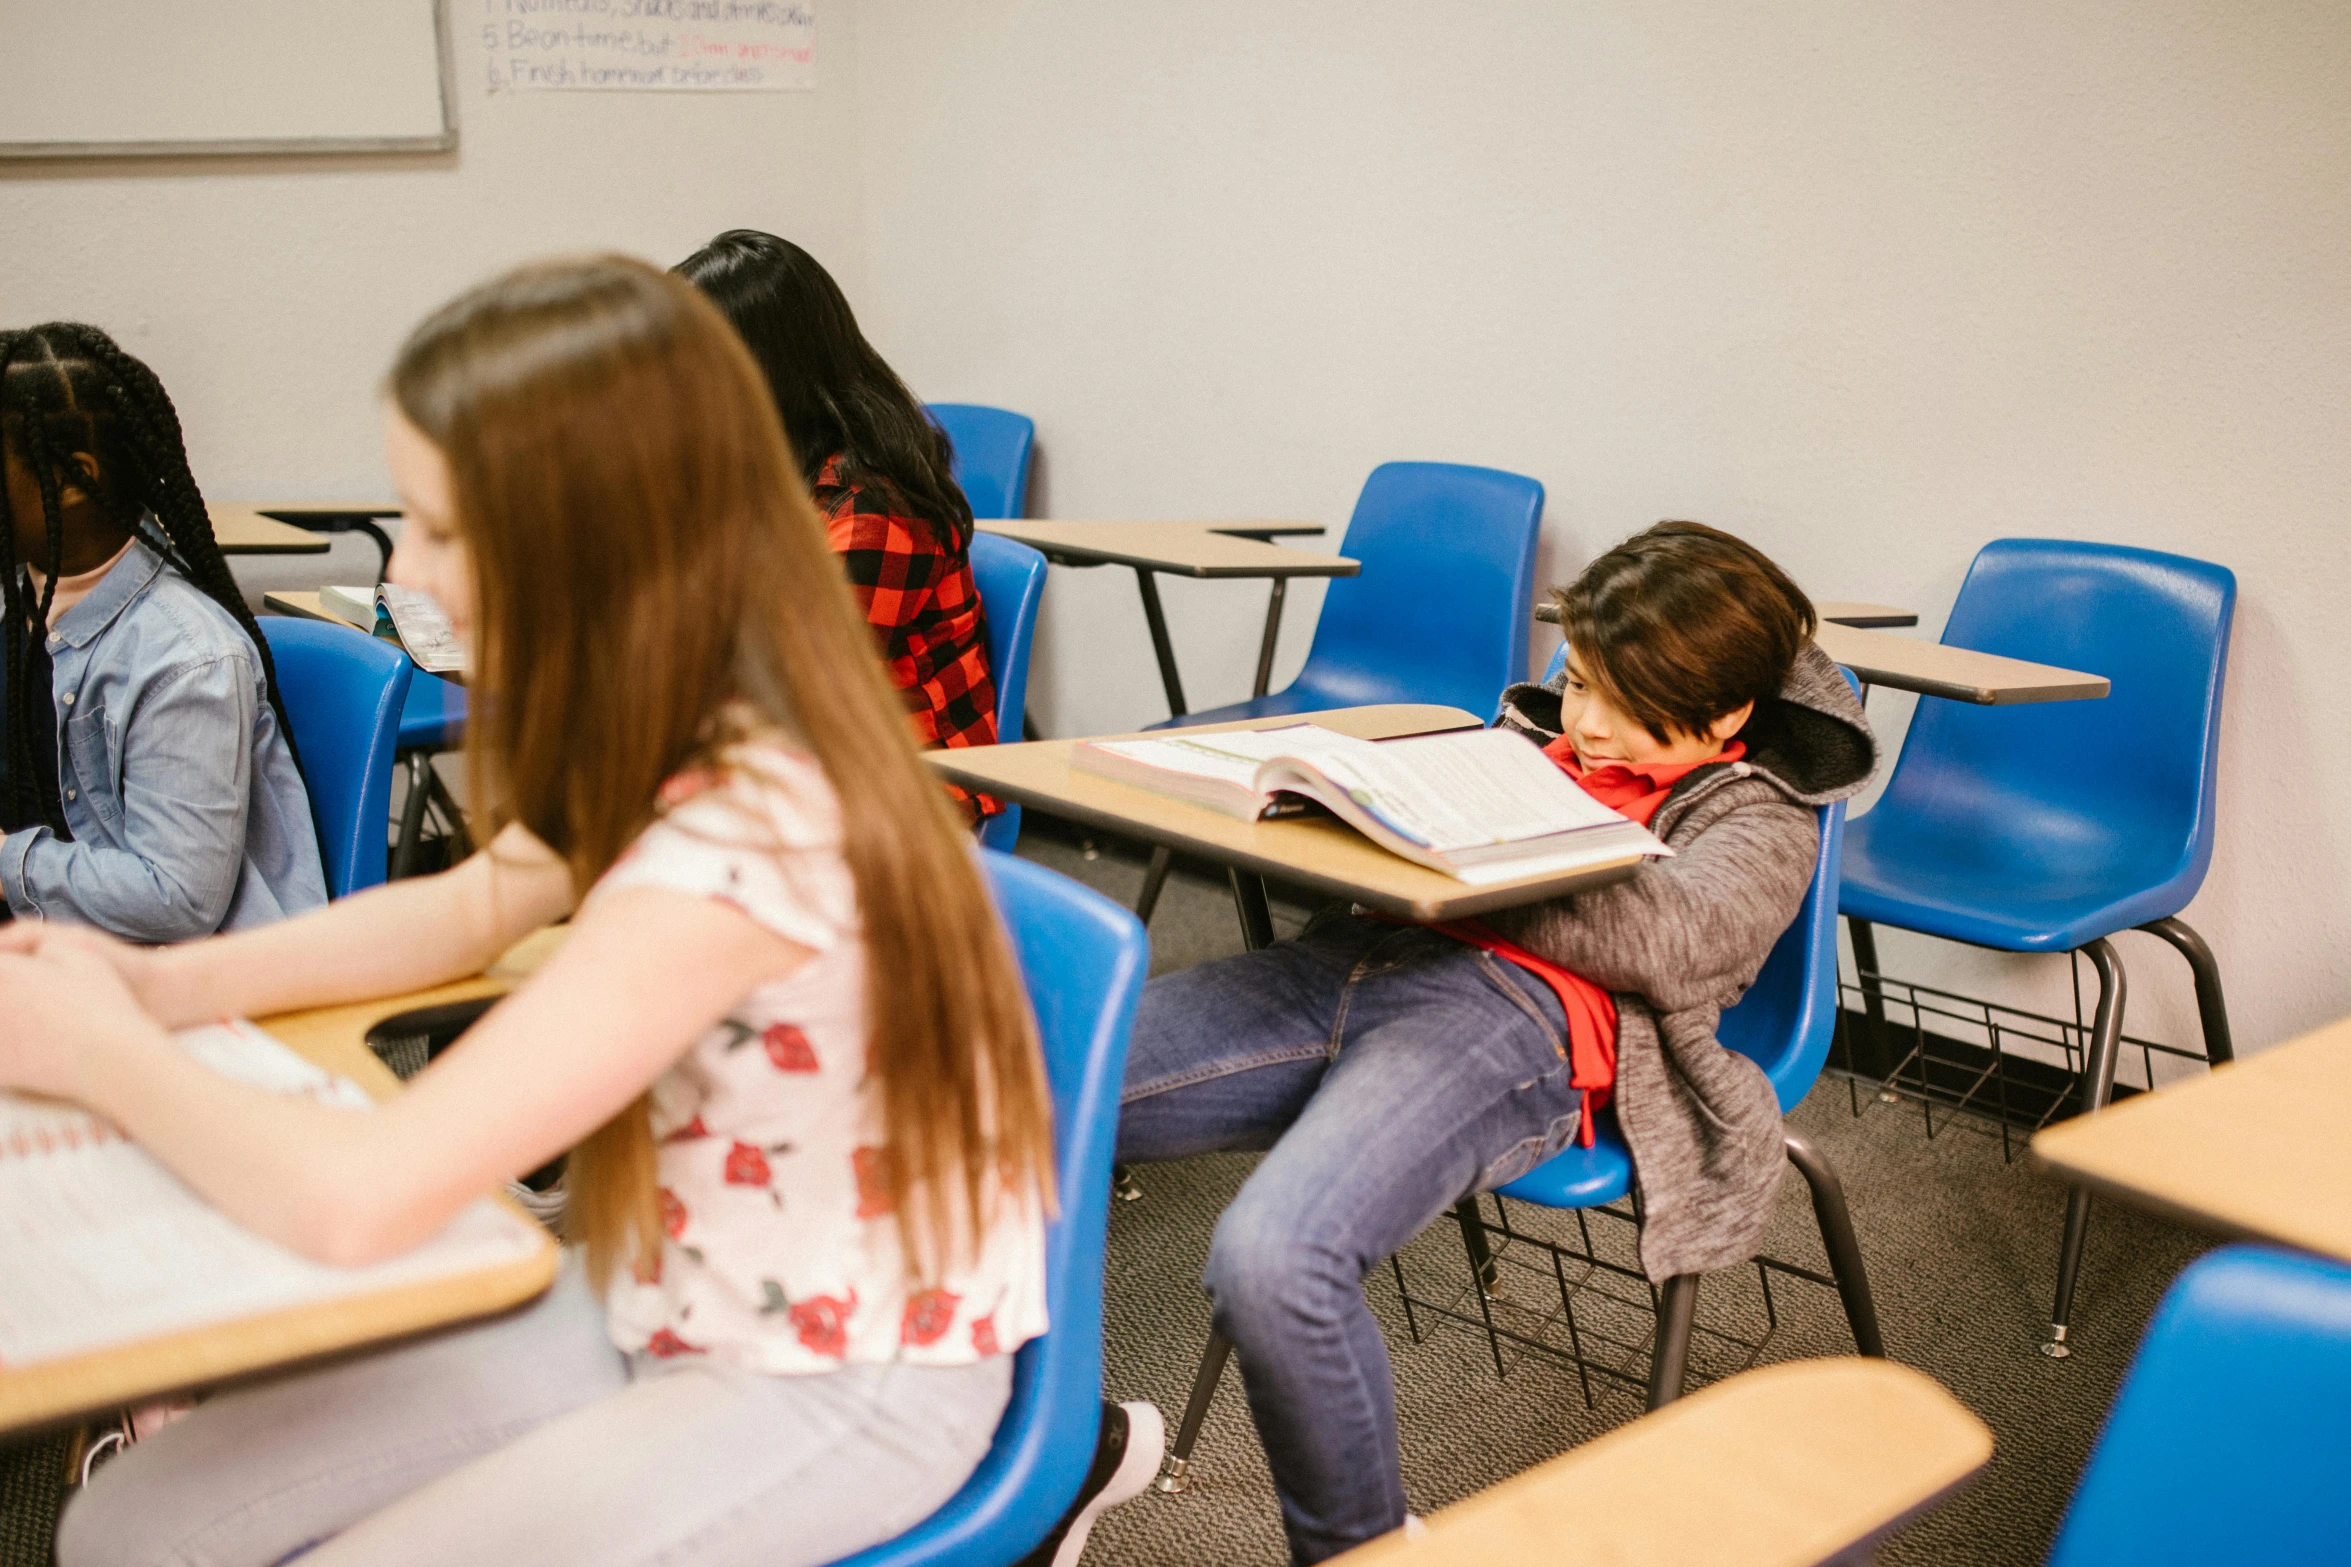 a group of children sitting at desks in a classroom, by Anna Findlay, pexels contest winner, incoherents, hunched shoulders, siting in a chair, rated t for teen, profile image